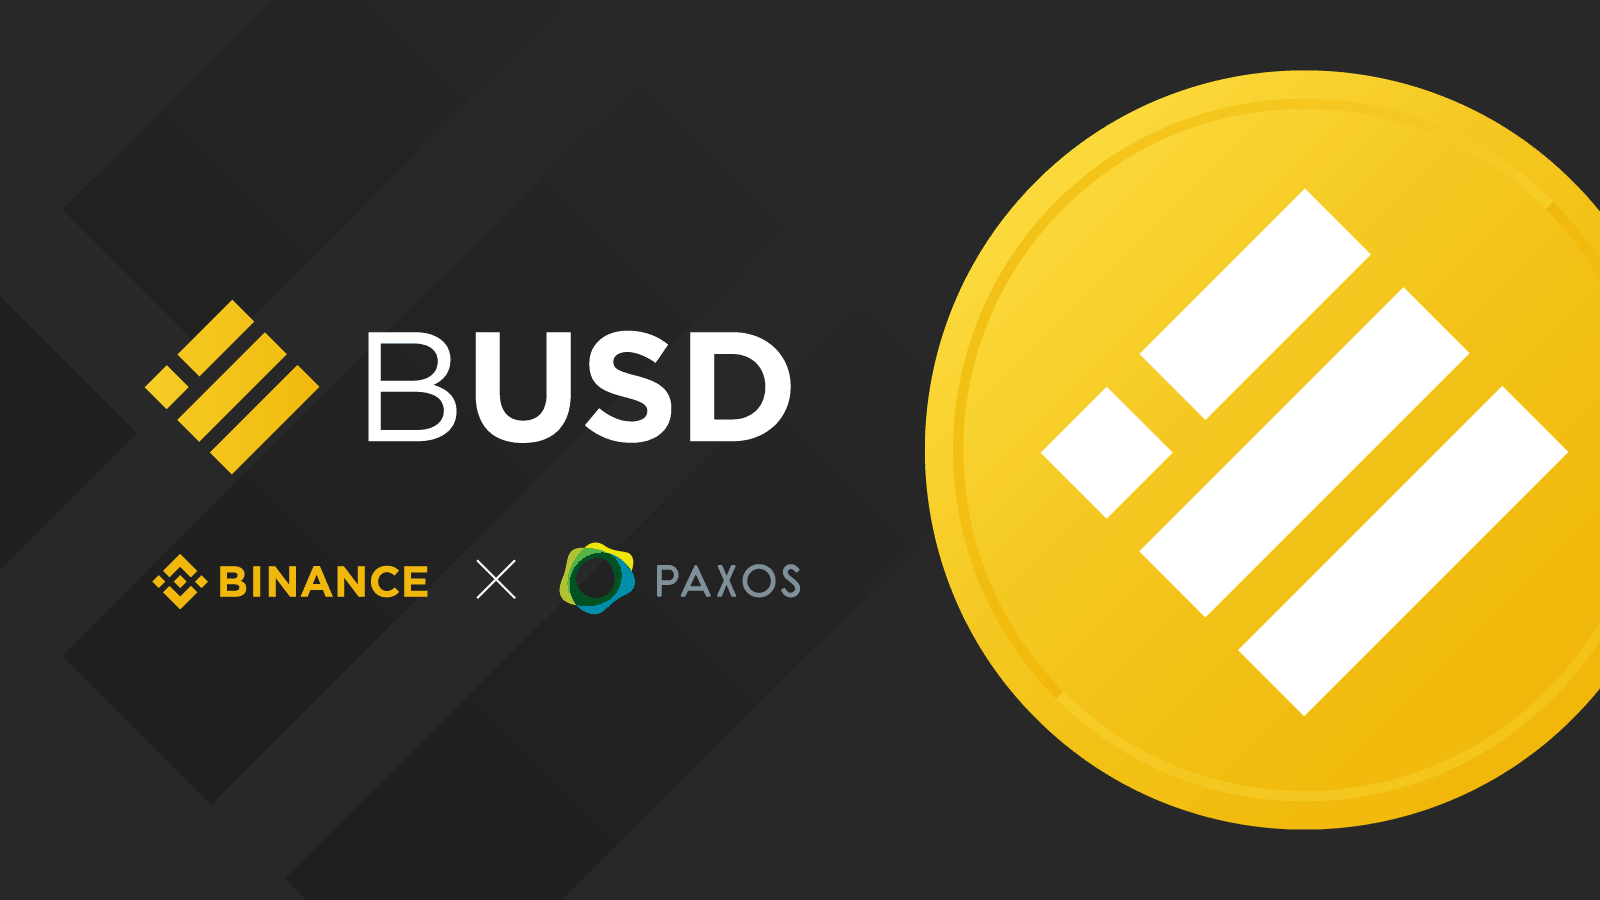 Binance Launches BUSD, a USD-Backed Stablecoin